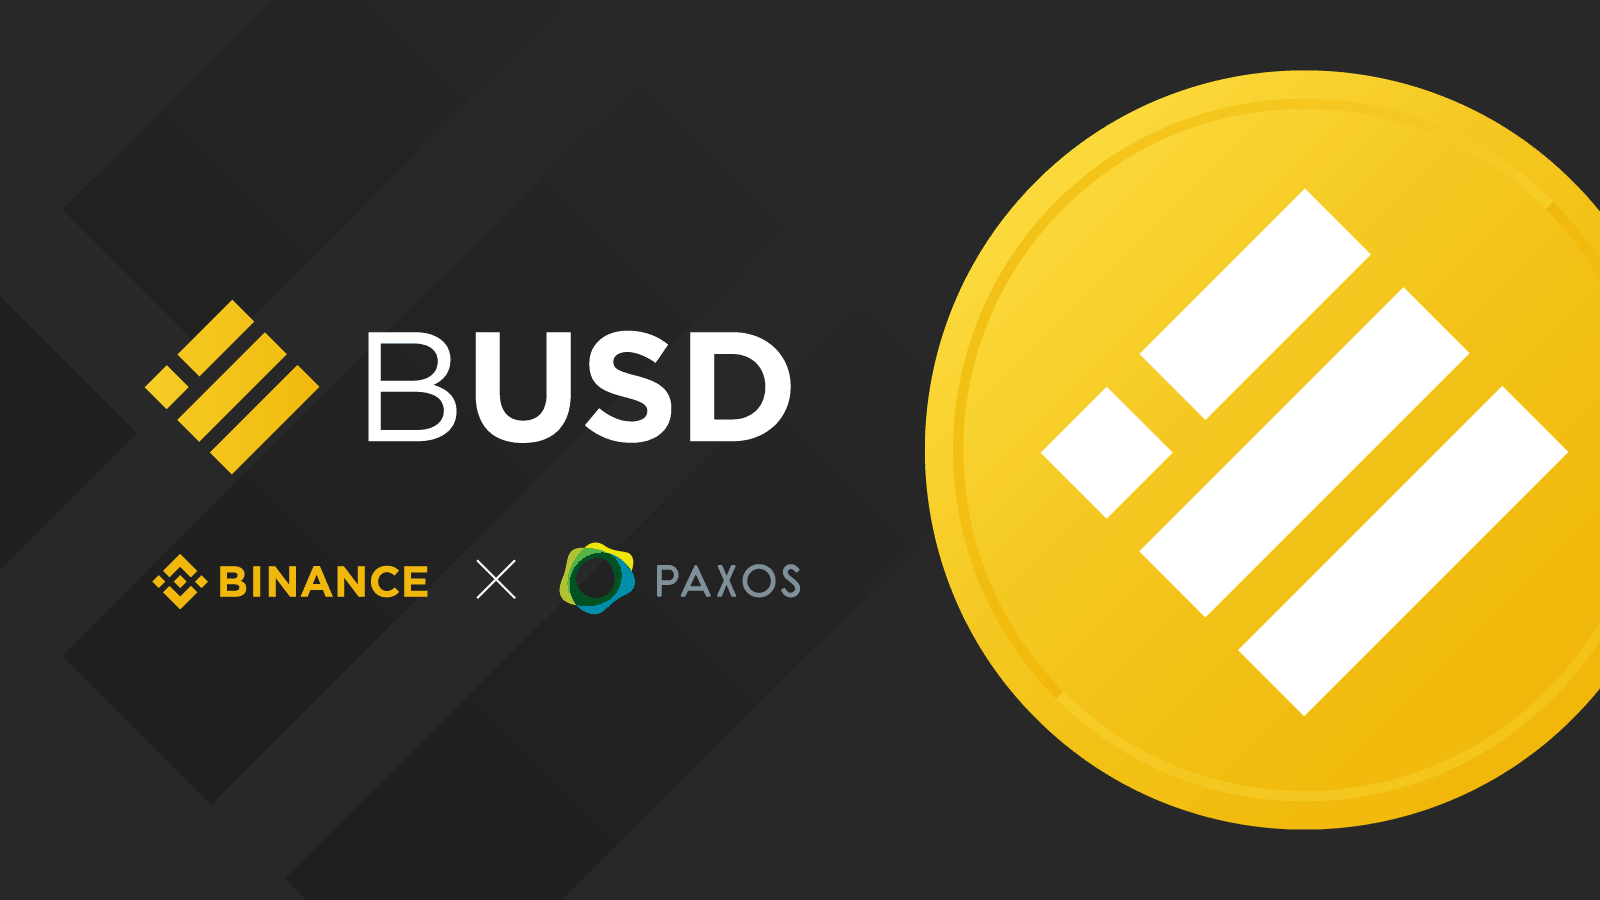 Binance Launches BUSD, a USD-Backed Stablecoin